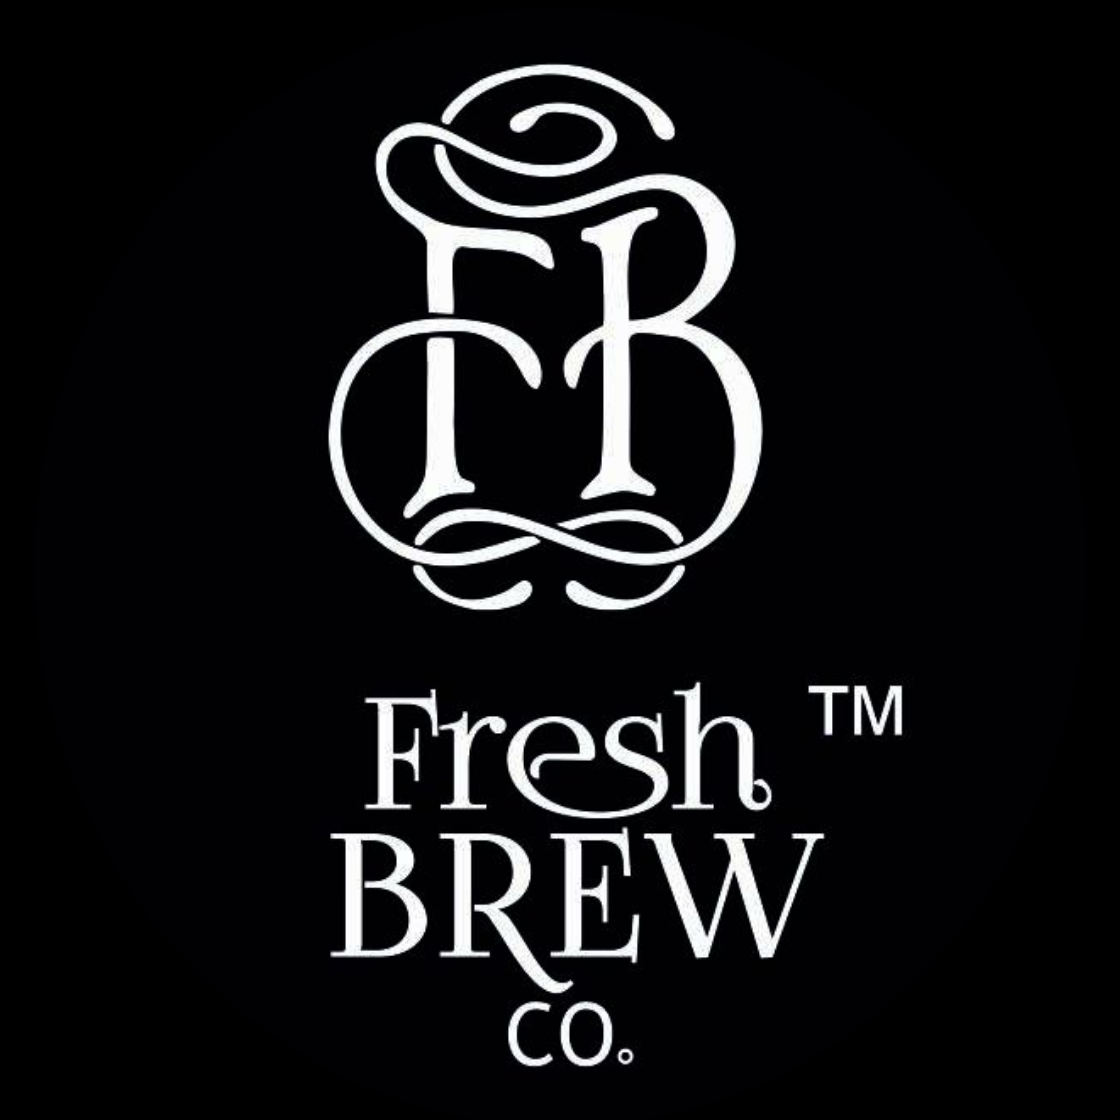 Fresh single serve artisan coffee is what we serve at the Fresh Brew Co